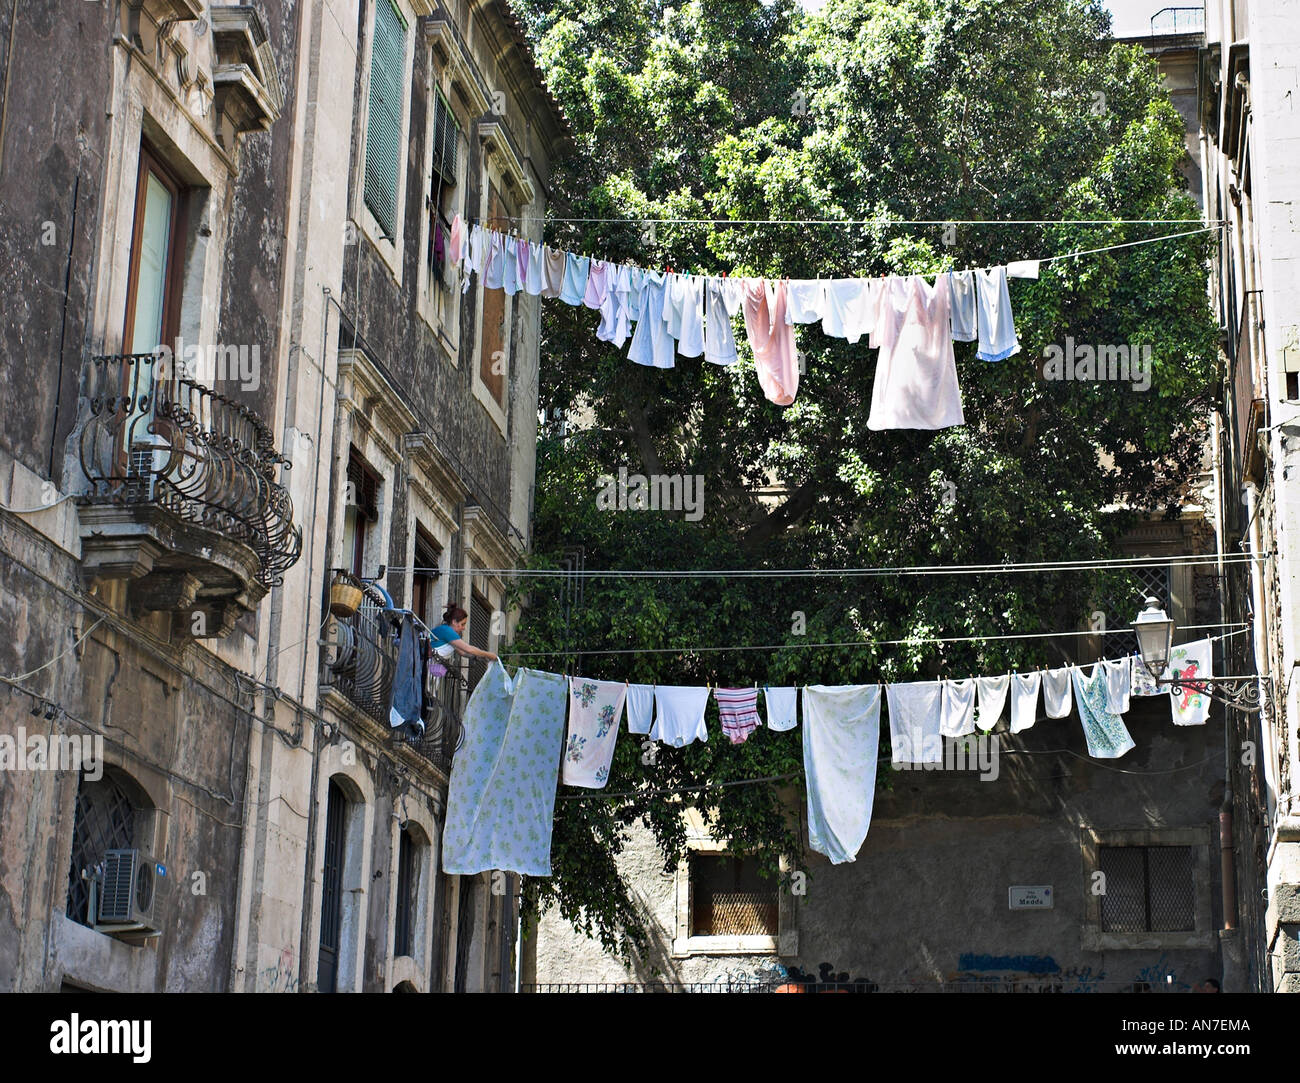 A woman puts out her washing between two historic buildings high above the street Stock Photo